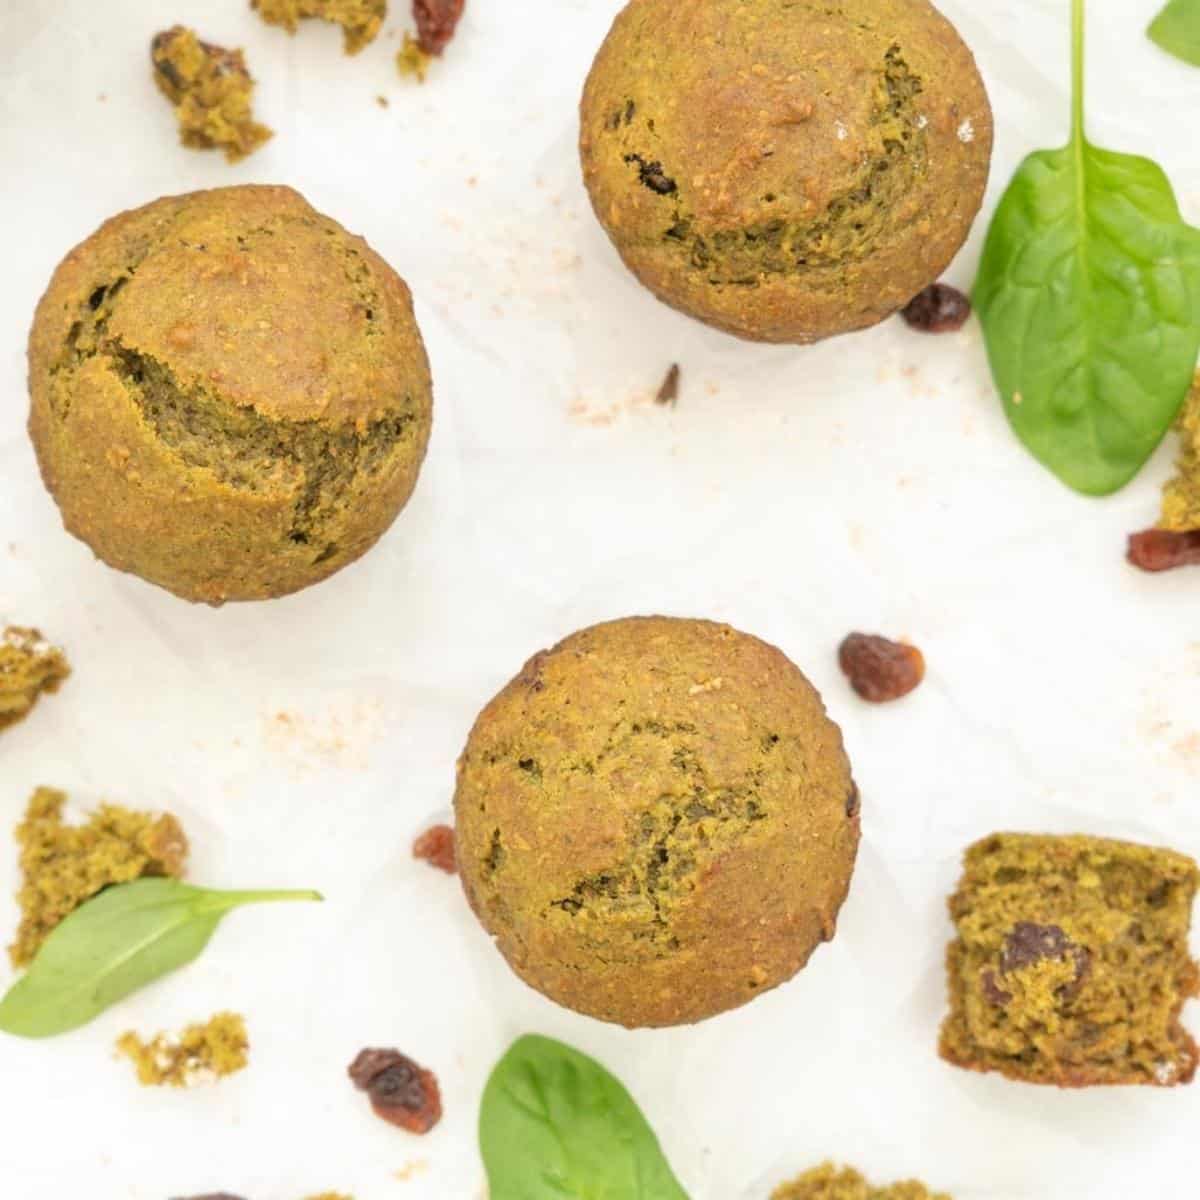 Green spinach muffins on crinkled baking paper scattered eith raisins and spinach leaves.